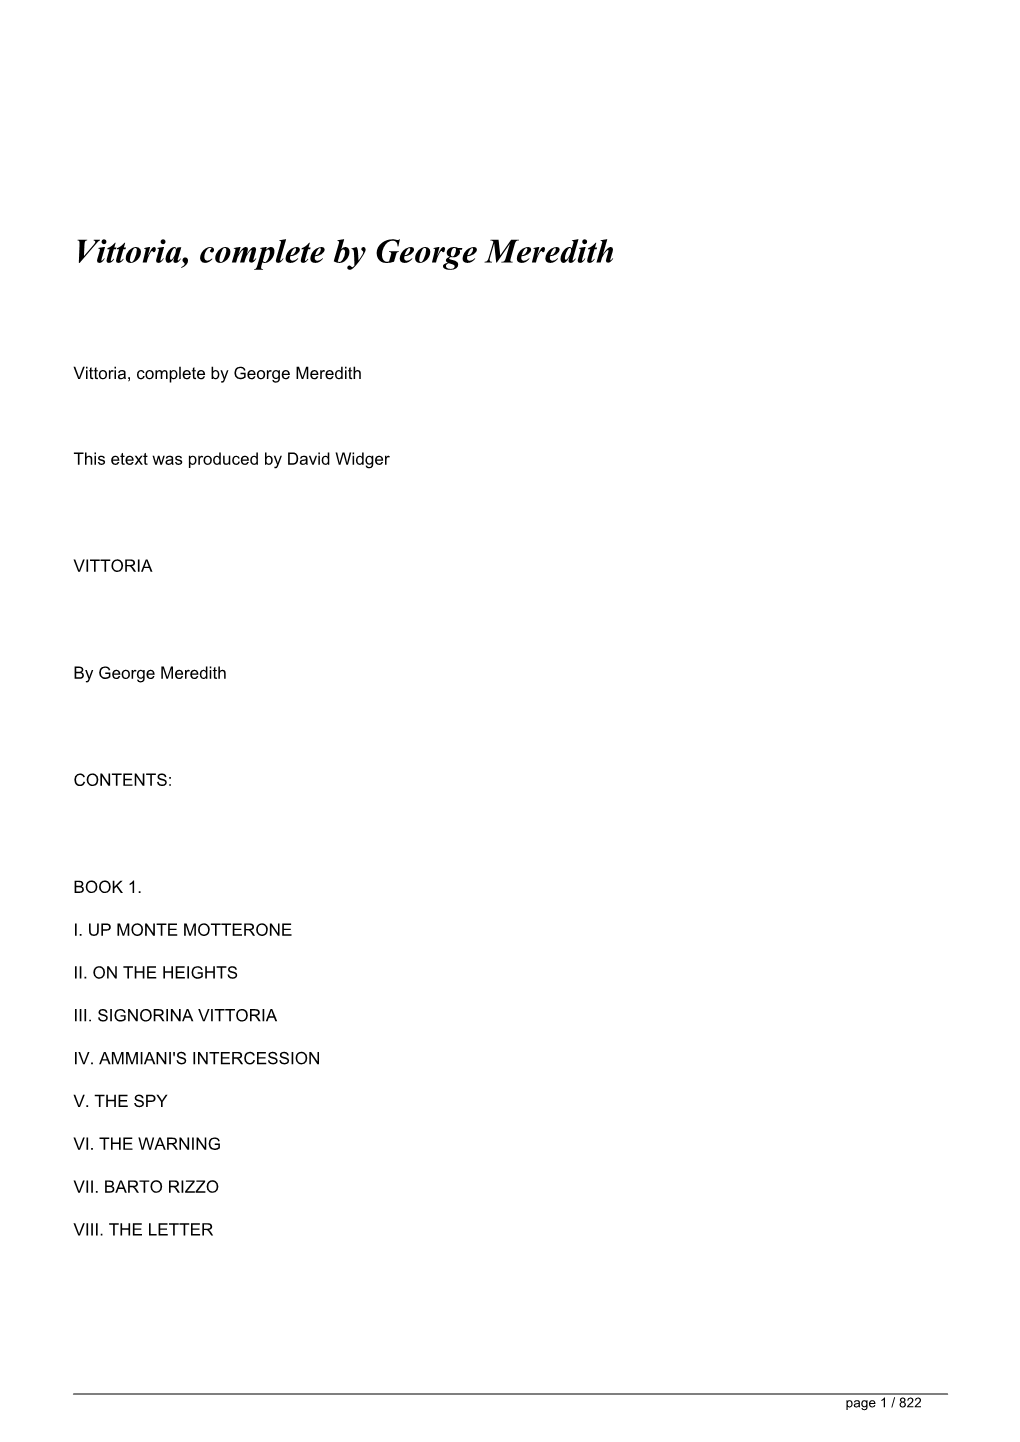 Vittoria, Complete by George Meredith&lt;/H1&gt;